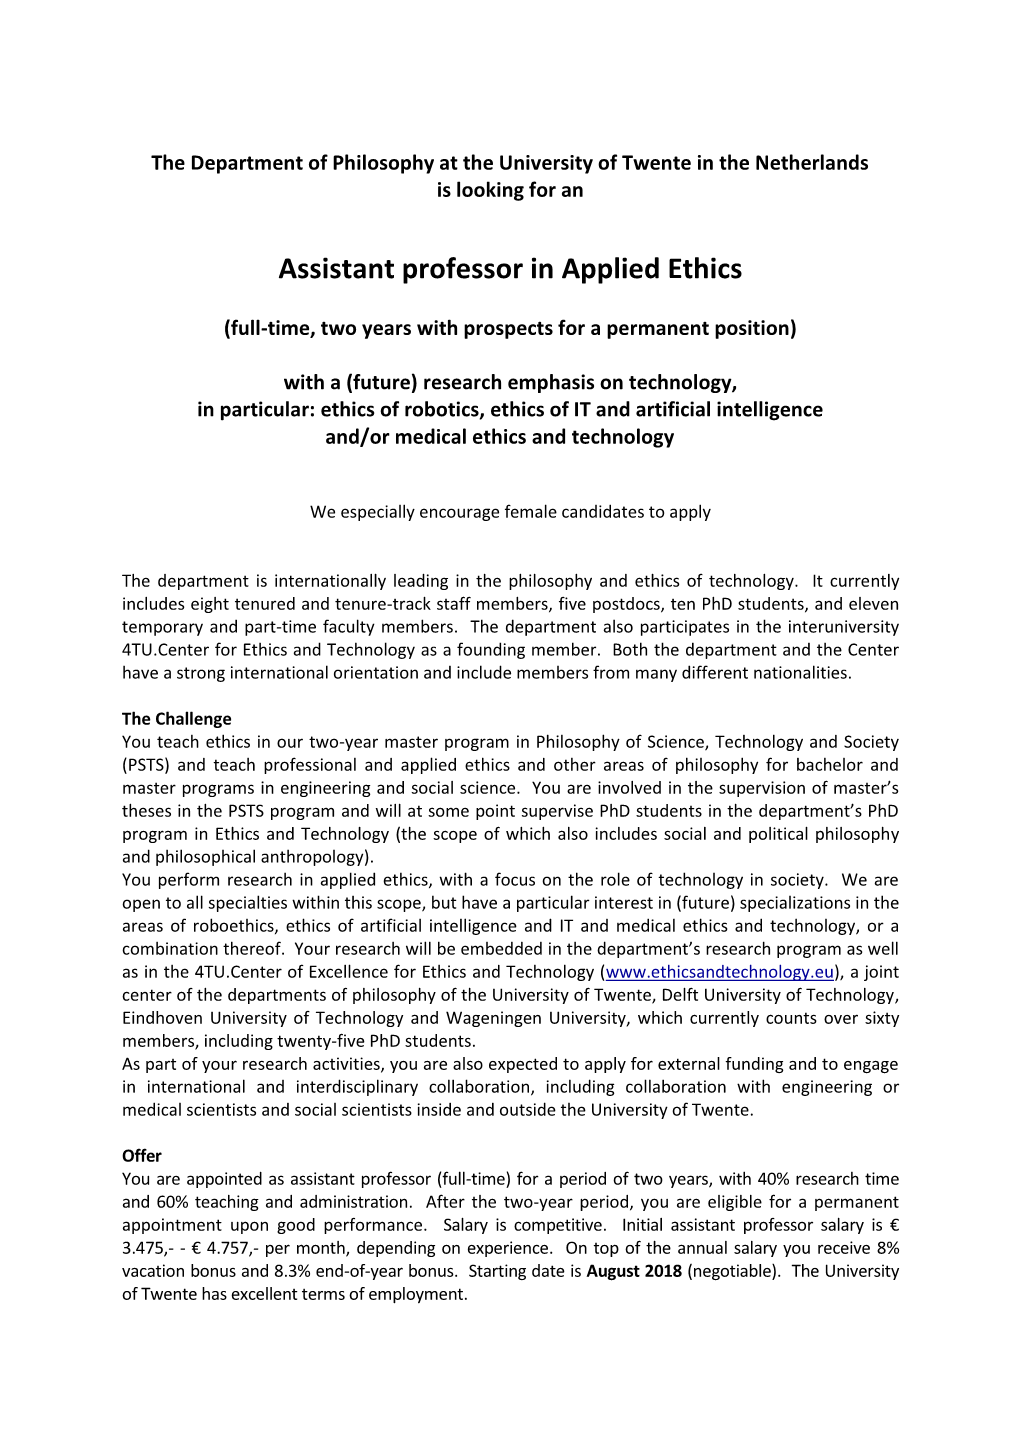 Assistant Professor in Applied Ethics